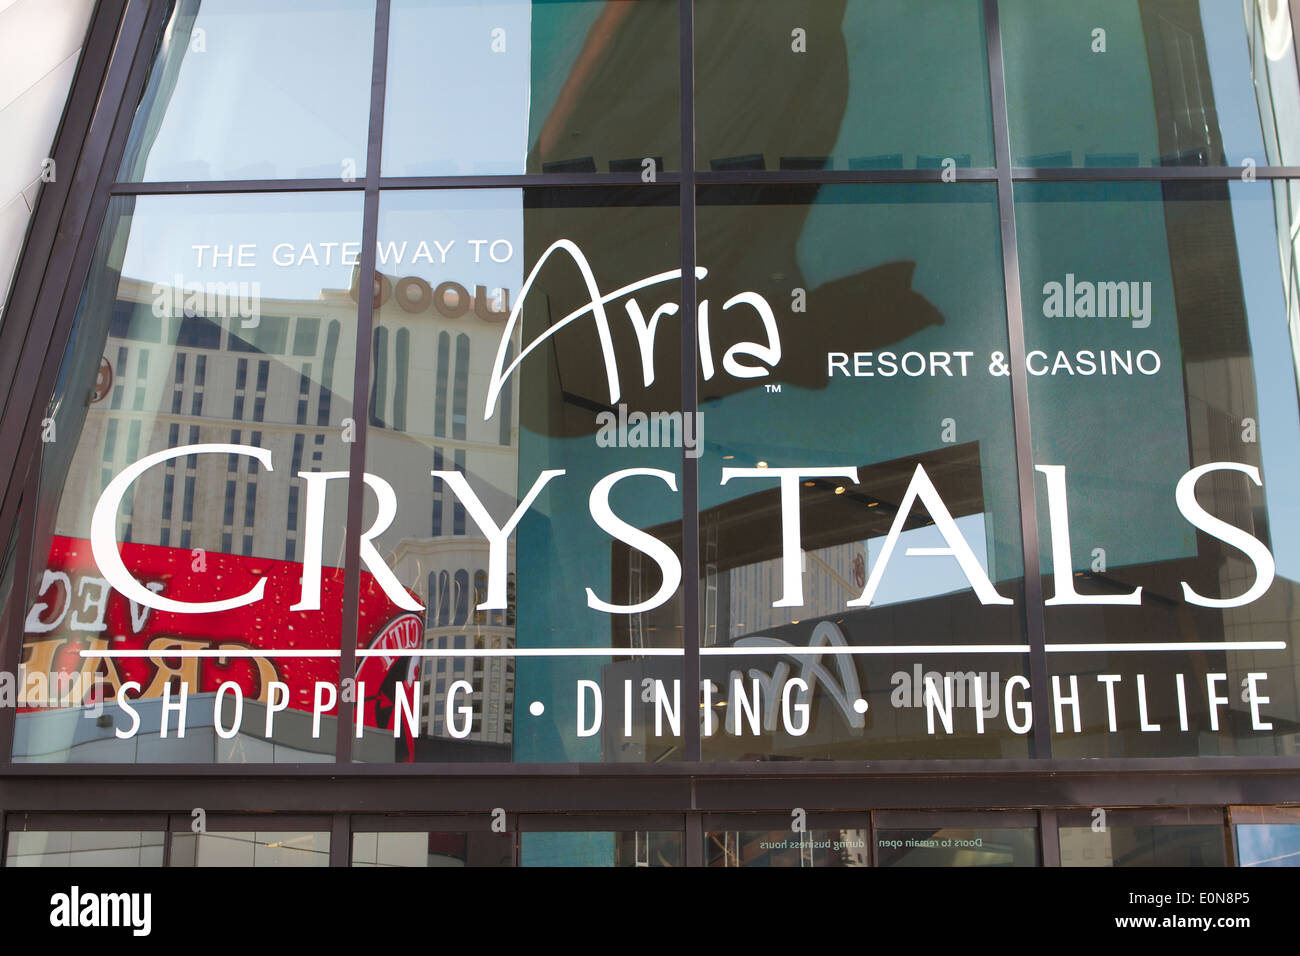 Aria resort, Crystals luxury shopping dining and nightlife center sign and logo  in Las Vegas Nevada Stock Photo